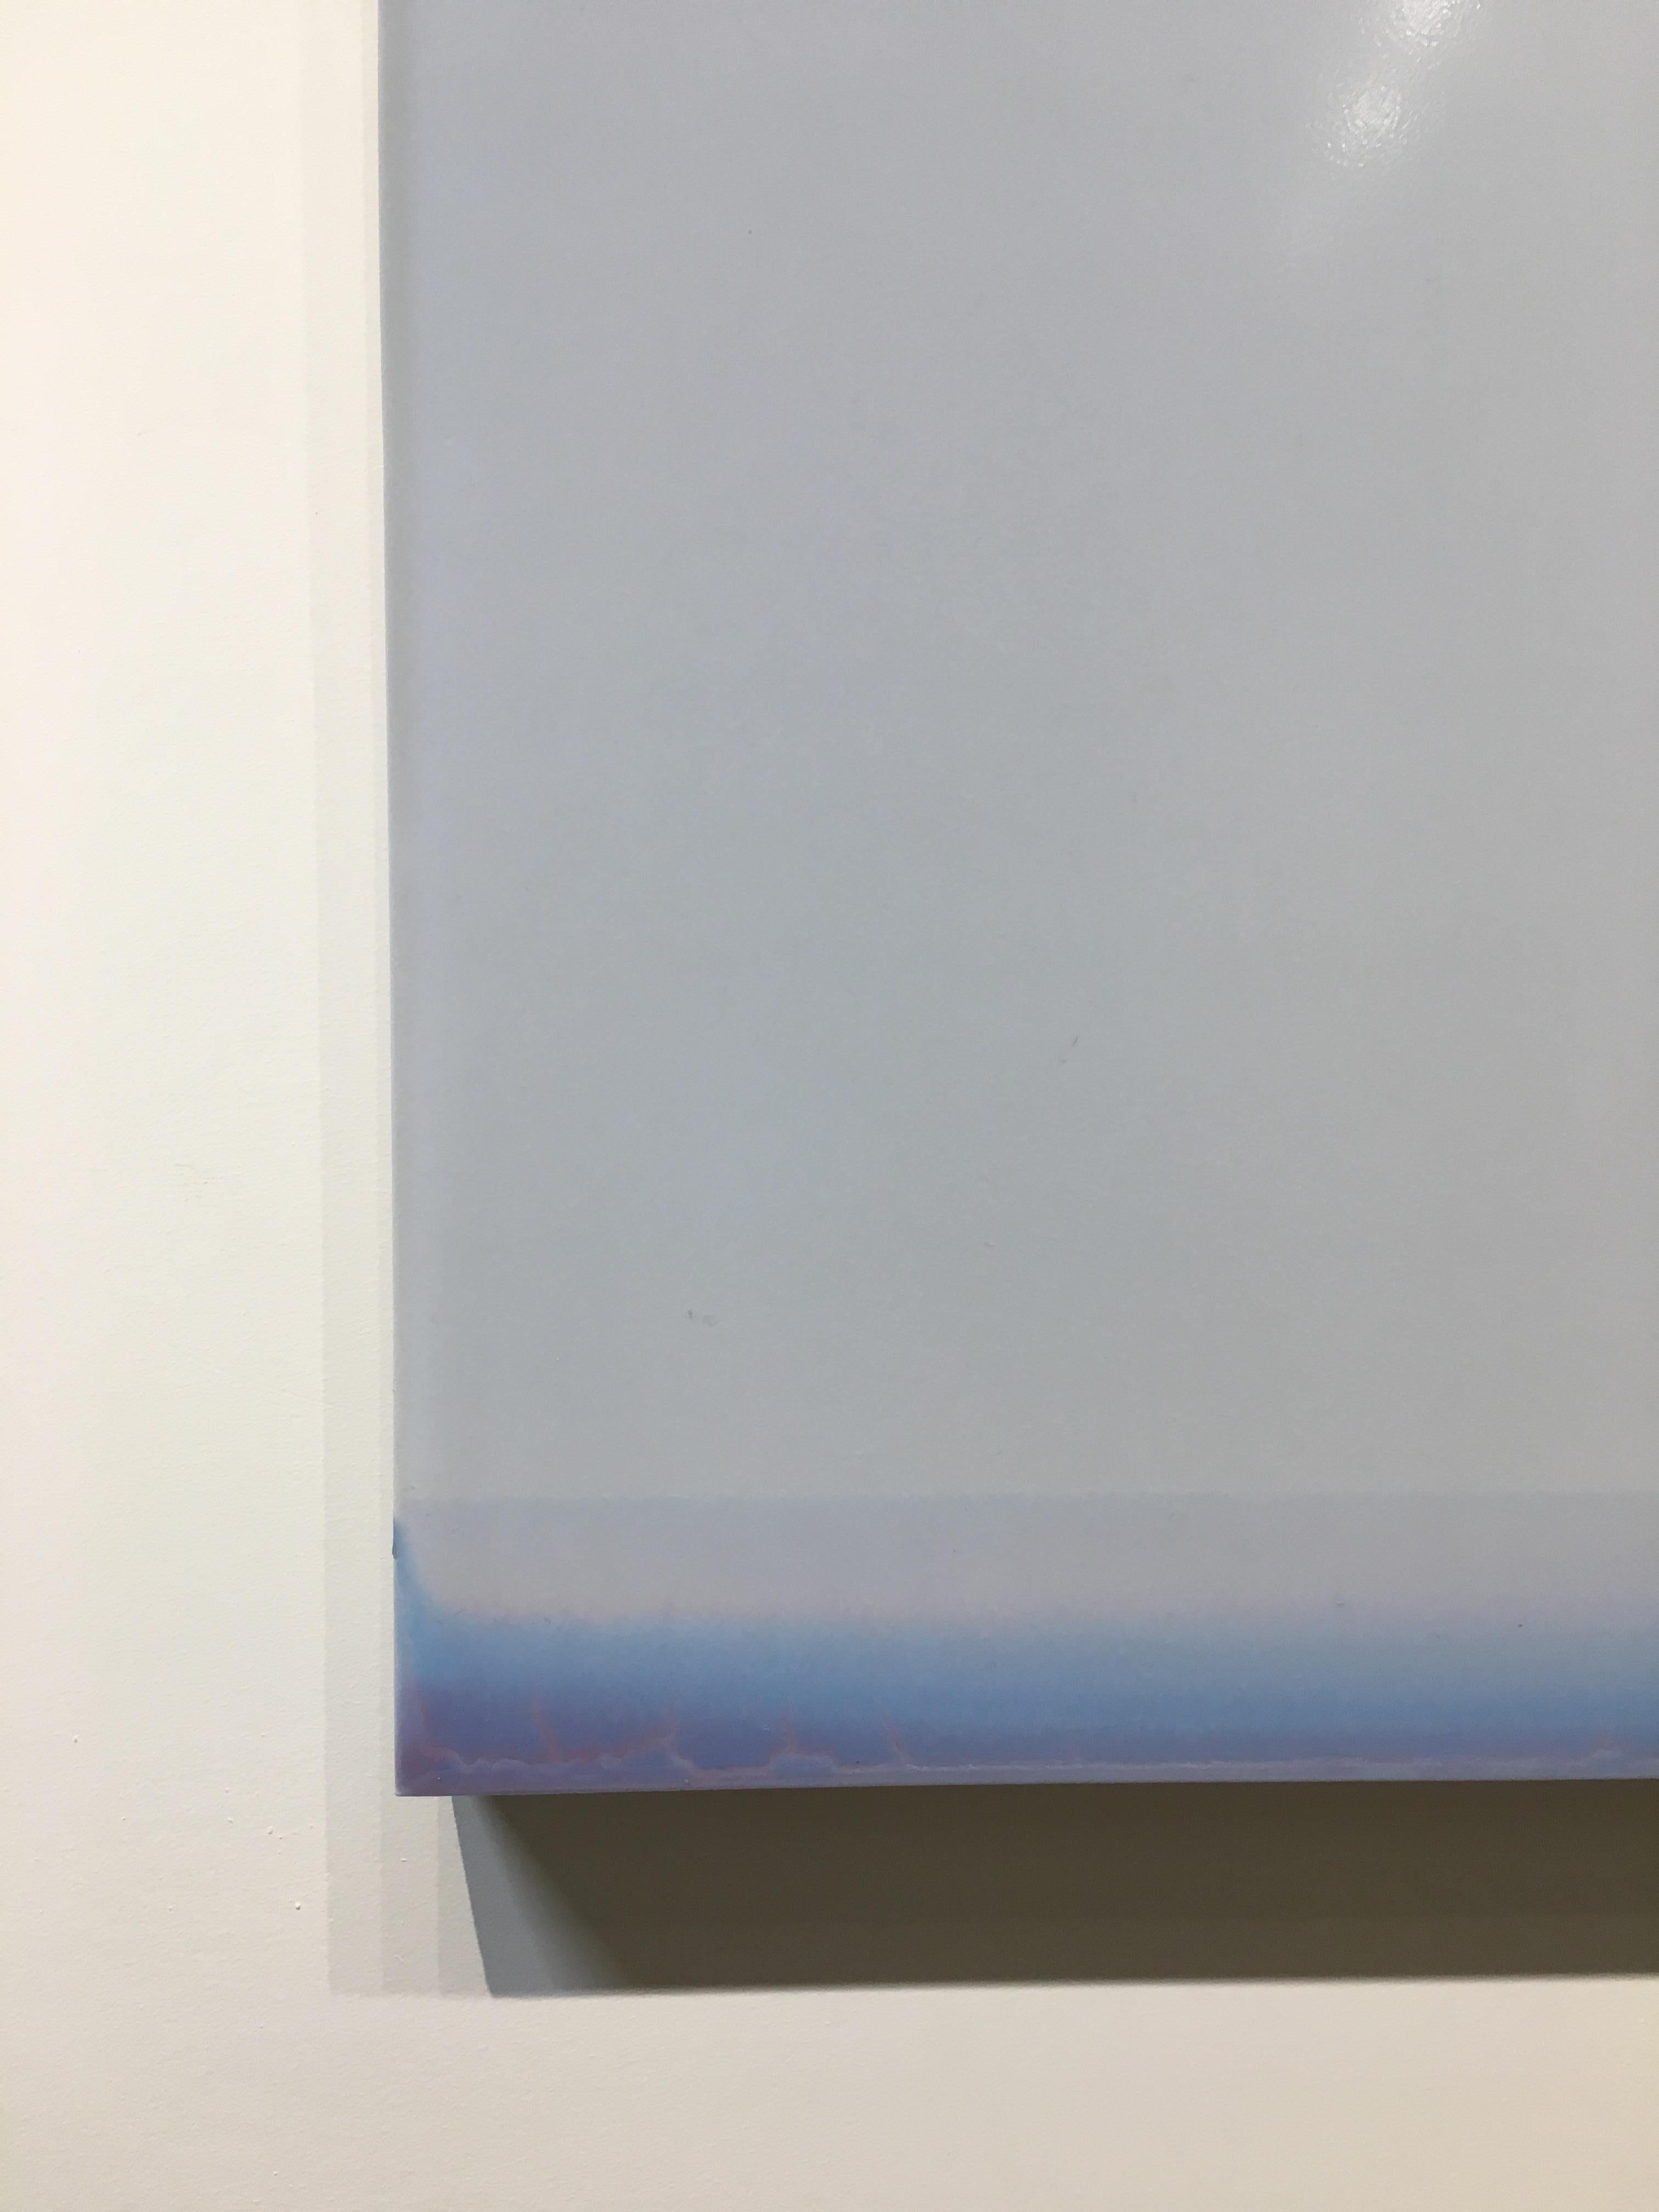 Glossy and rich in texture, Outland Number Three by Susan English is a wonderful play of color, light, and composition. Hues of soft blue and pale lavender purple meet and merge in soft horizontal planes. The gloss and depth of English's tinted